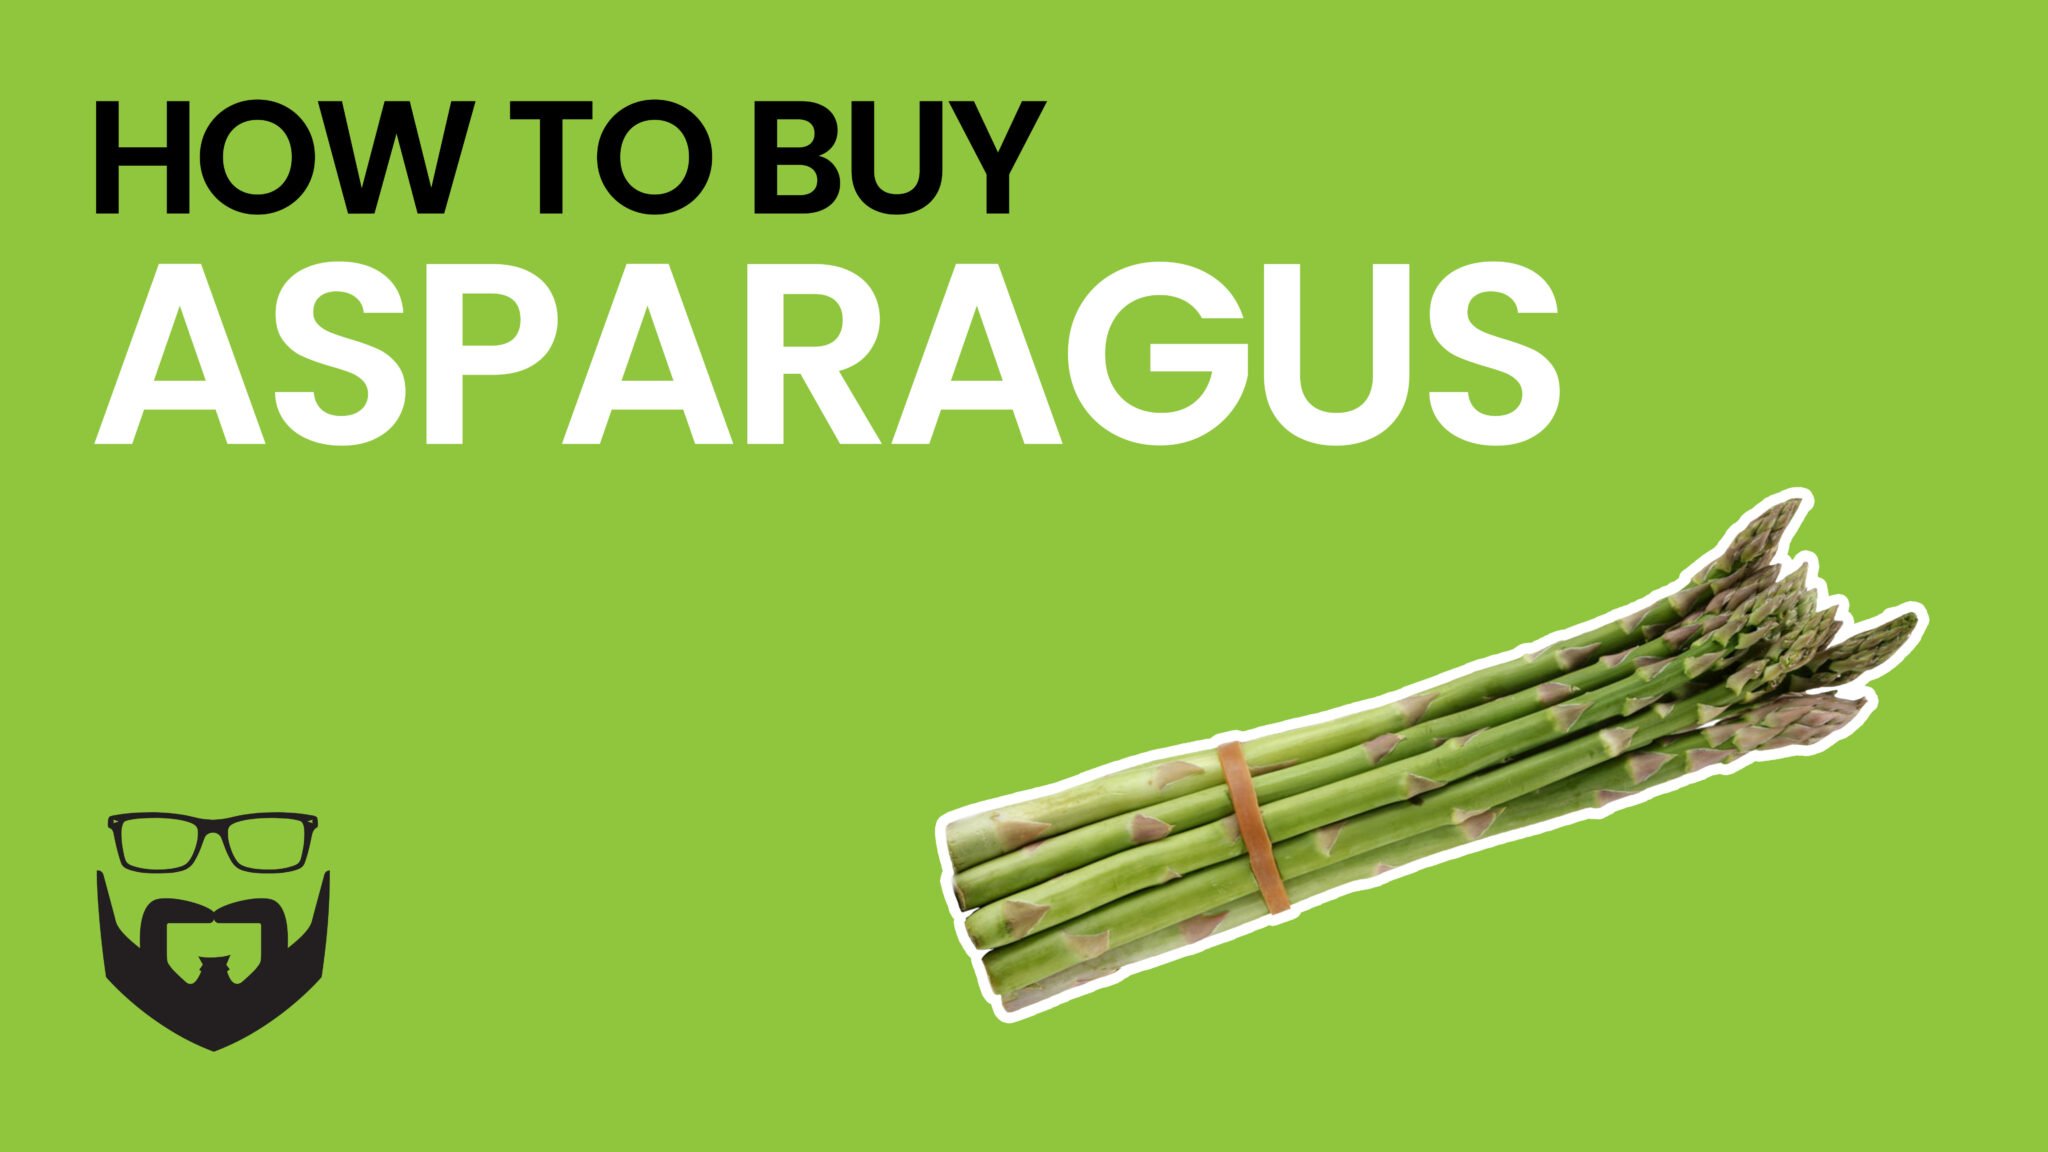 How to Buy Asparagus Video - Green